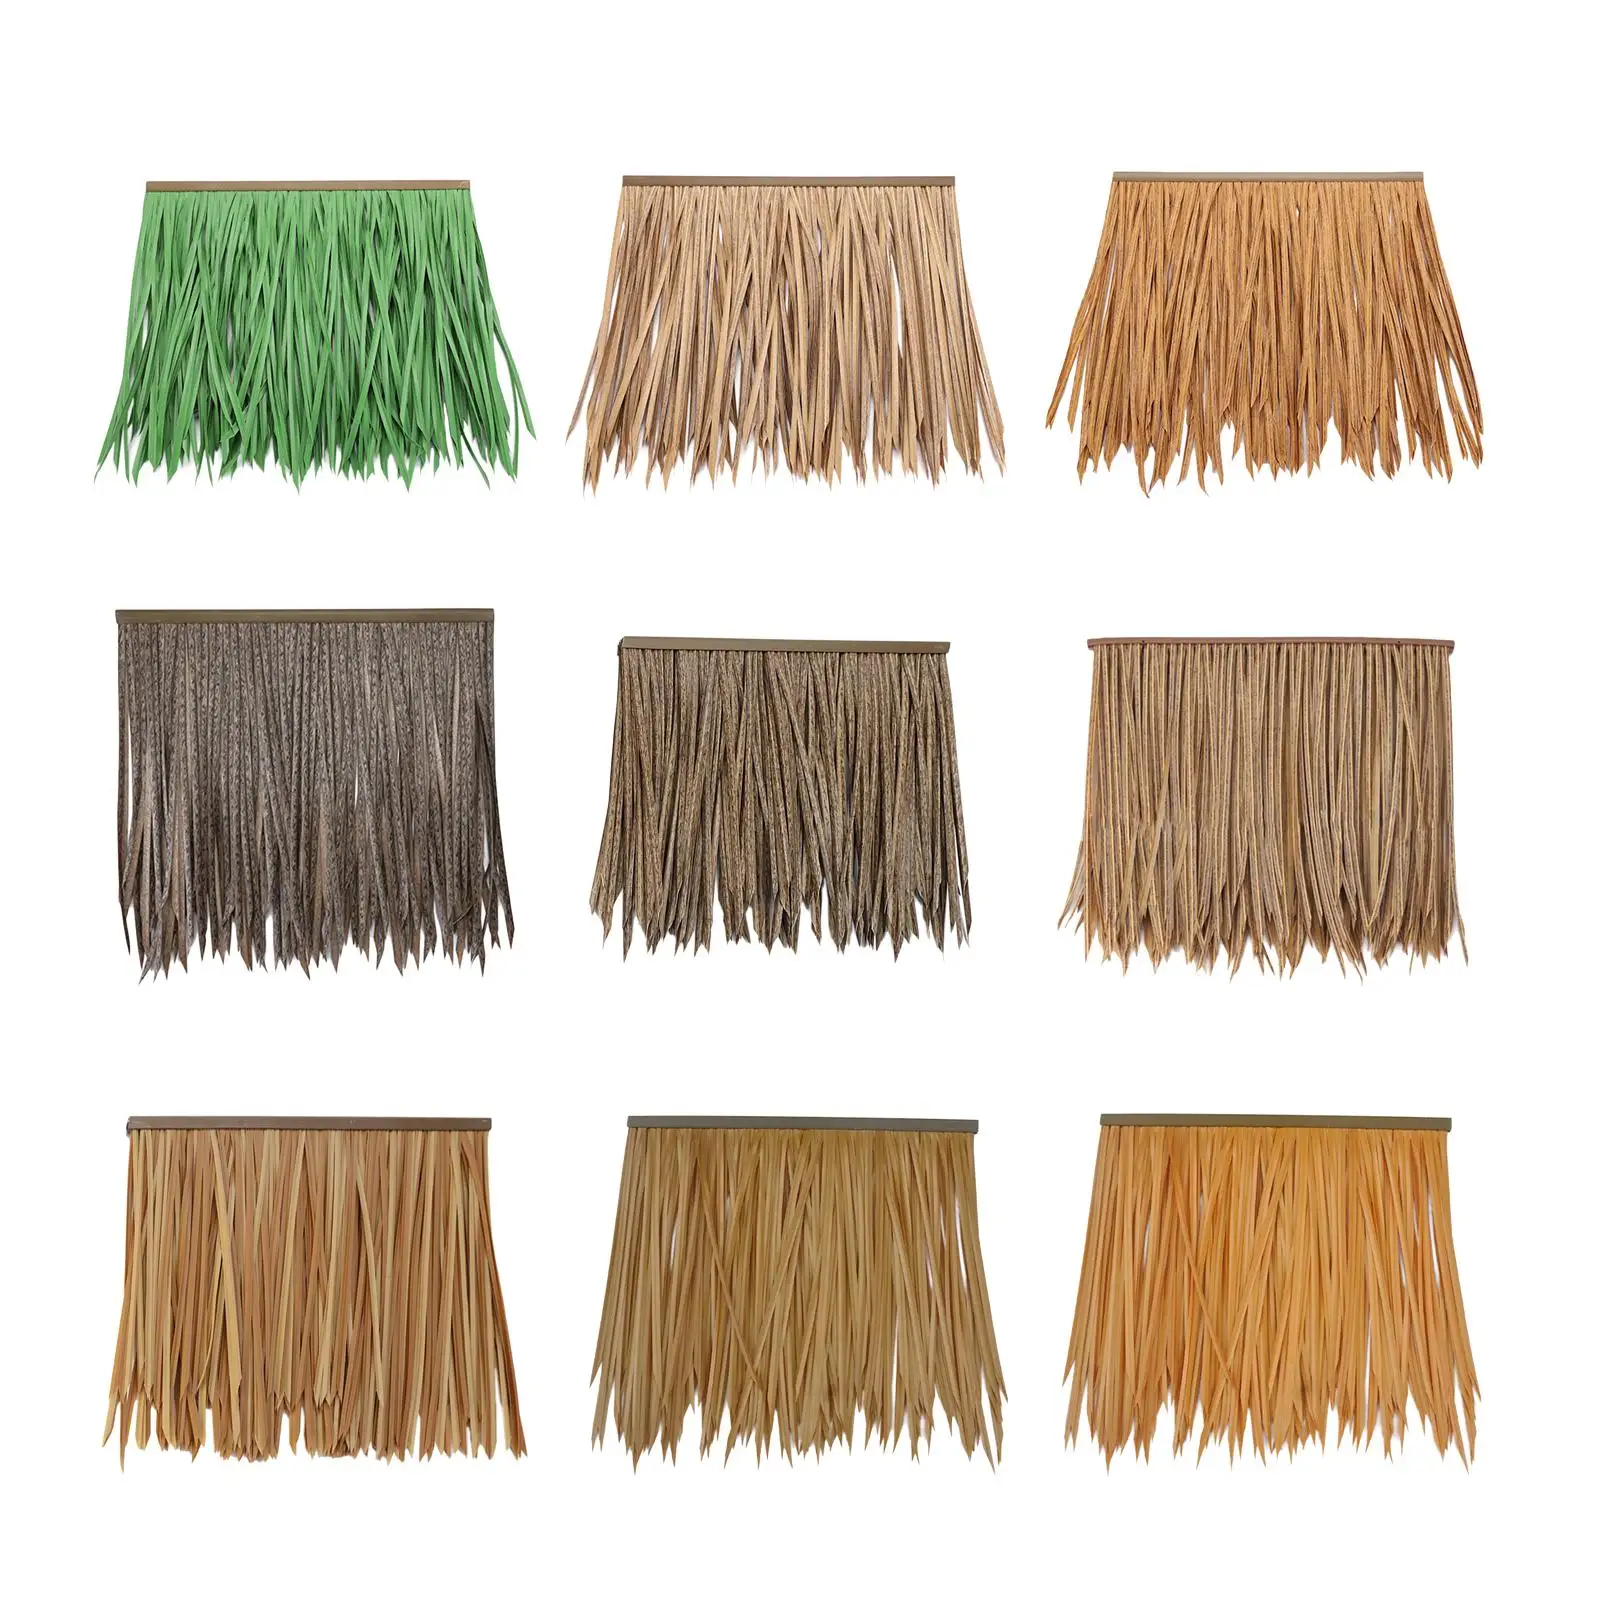 Straw Roof Thatch Decor Multi Use Universal Simple Using Accs Durable Grass Skirting Roof for Bar Outdoor Garden Pavilion Patio